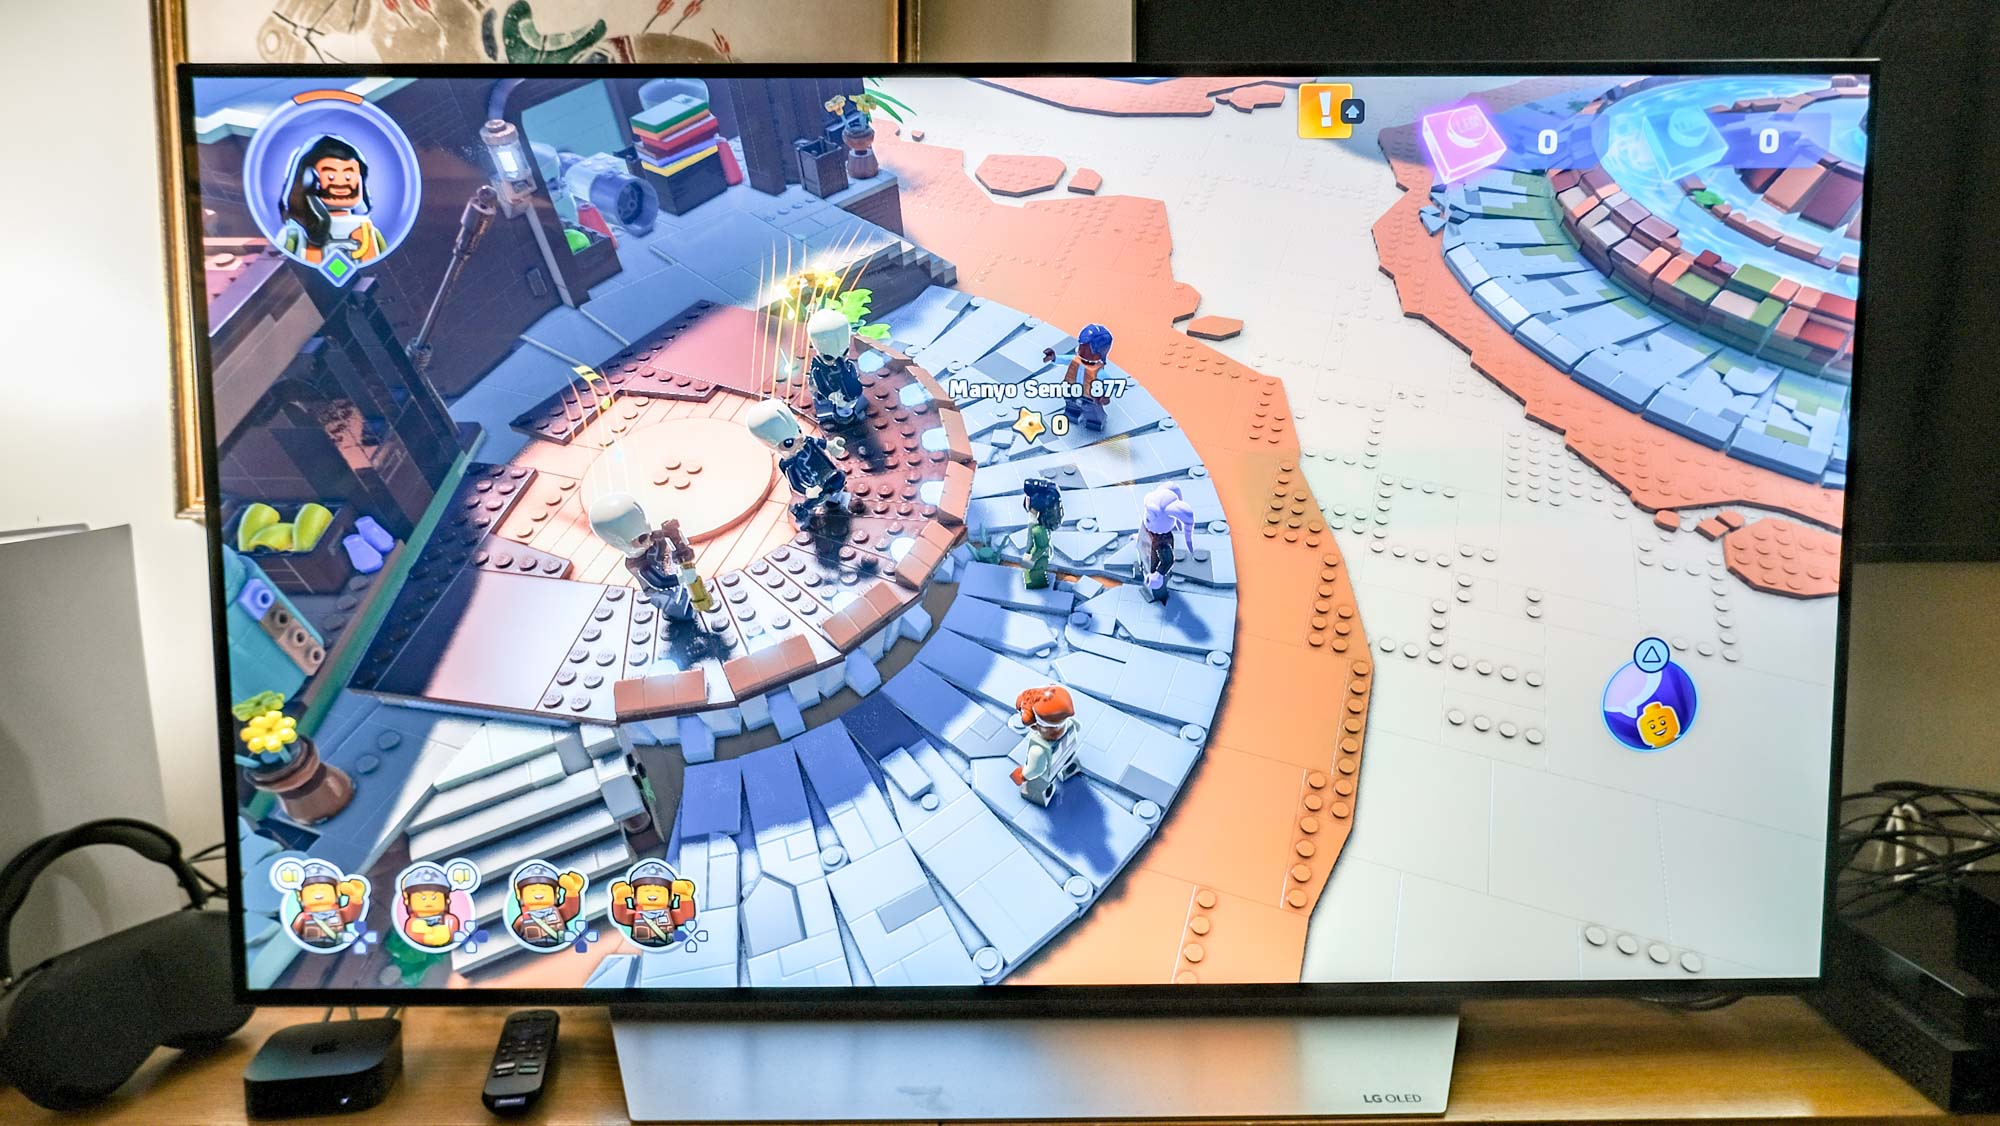 The Lego Star Wars game is played on a TV connected to the Apple TV 4K (2022)